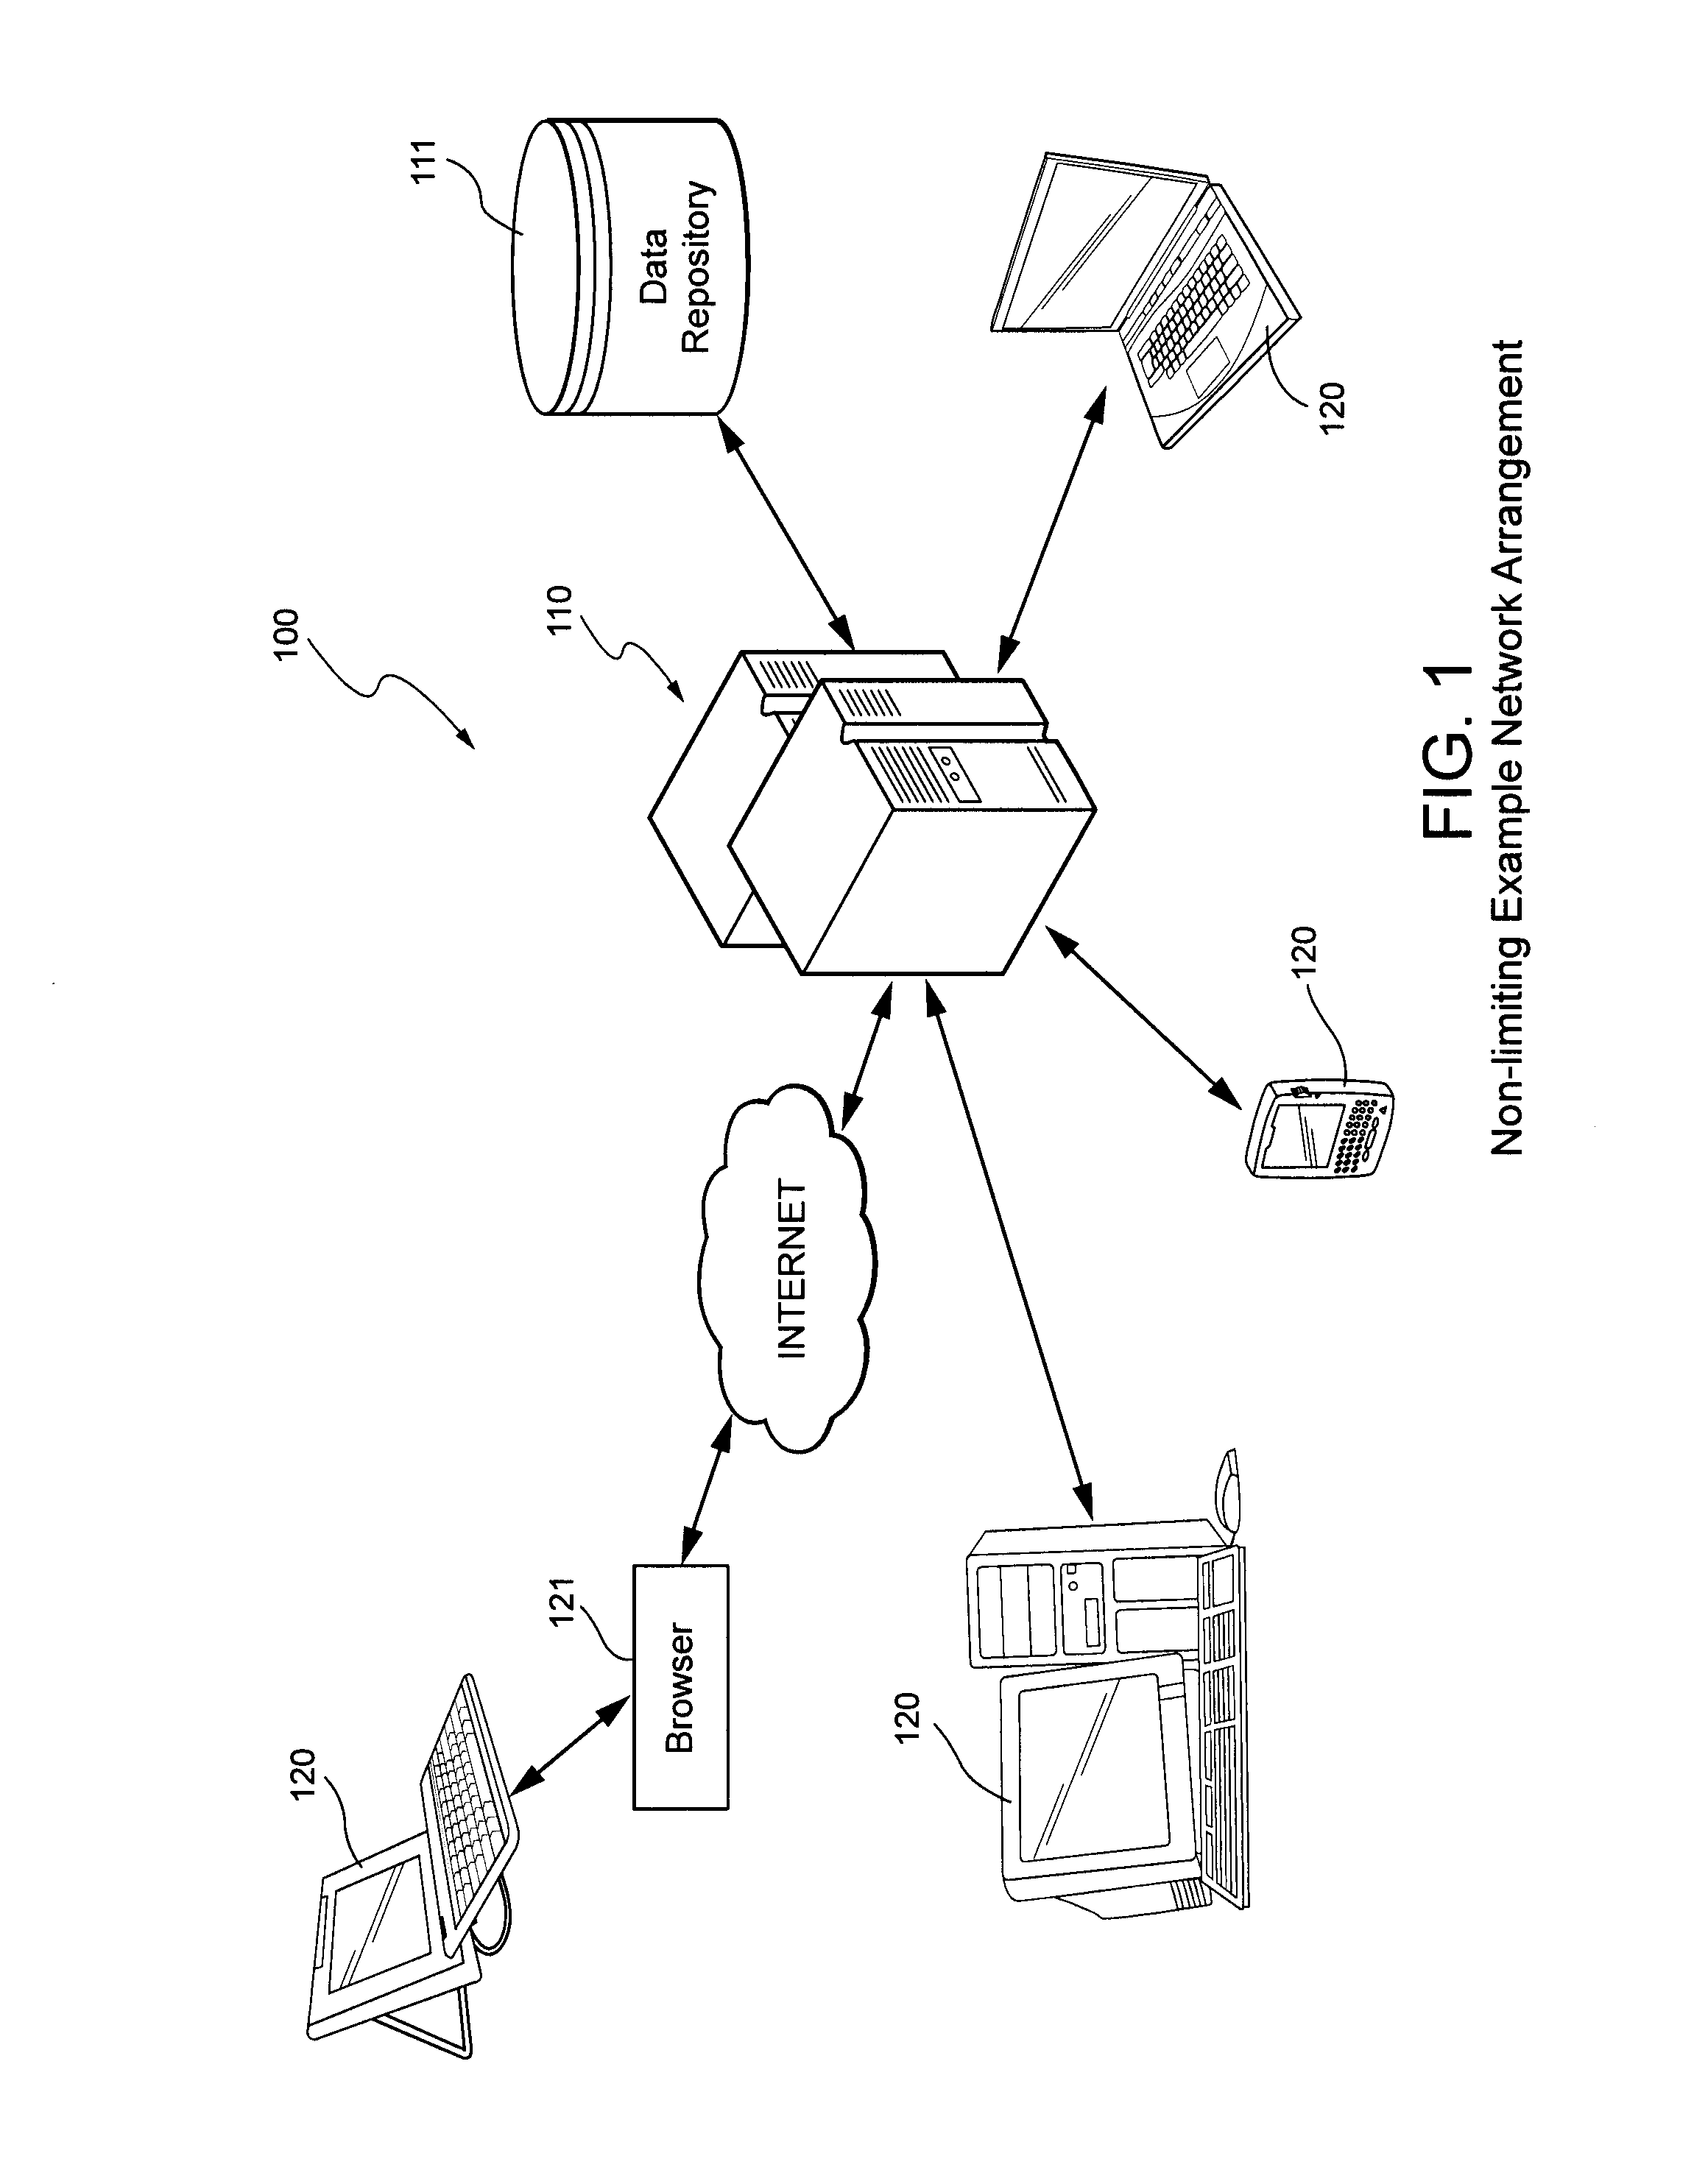 Method, System and Program Product for Intelligent Prediction of Industrial Gas Turbine Maintenance Workscope